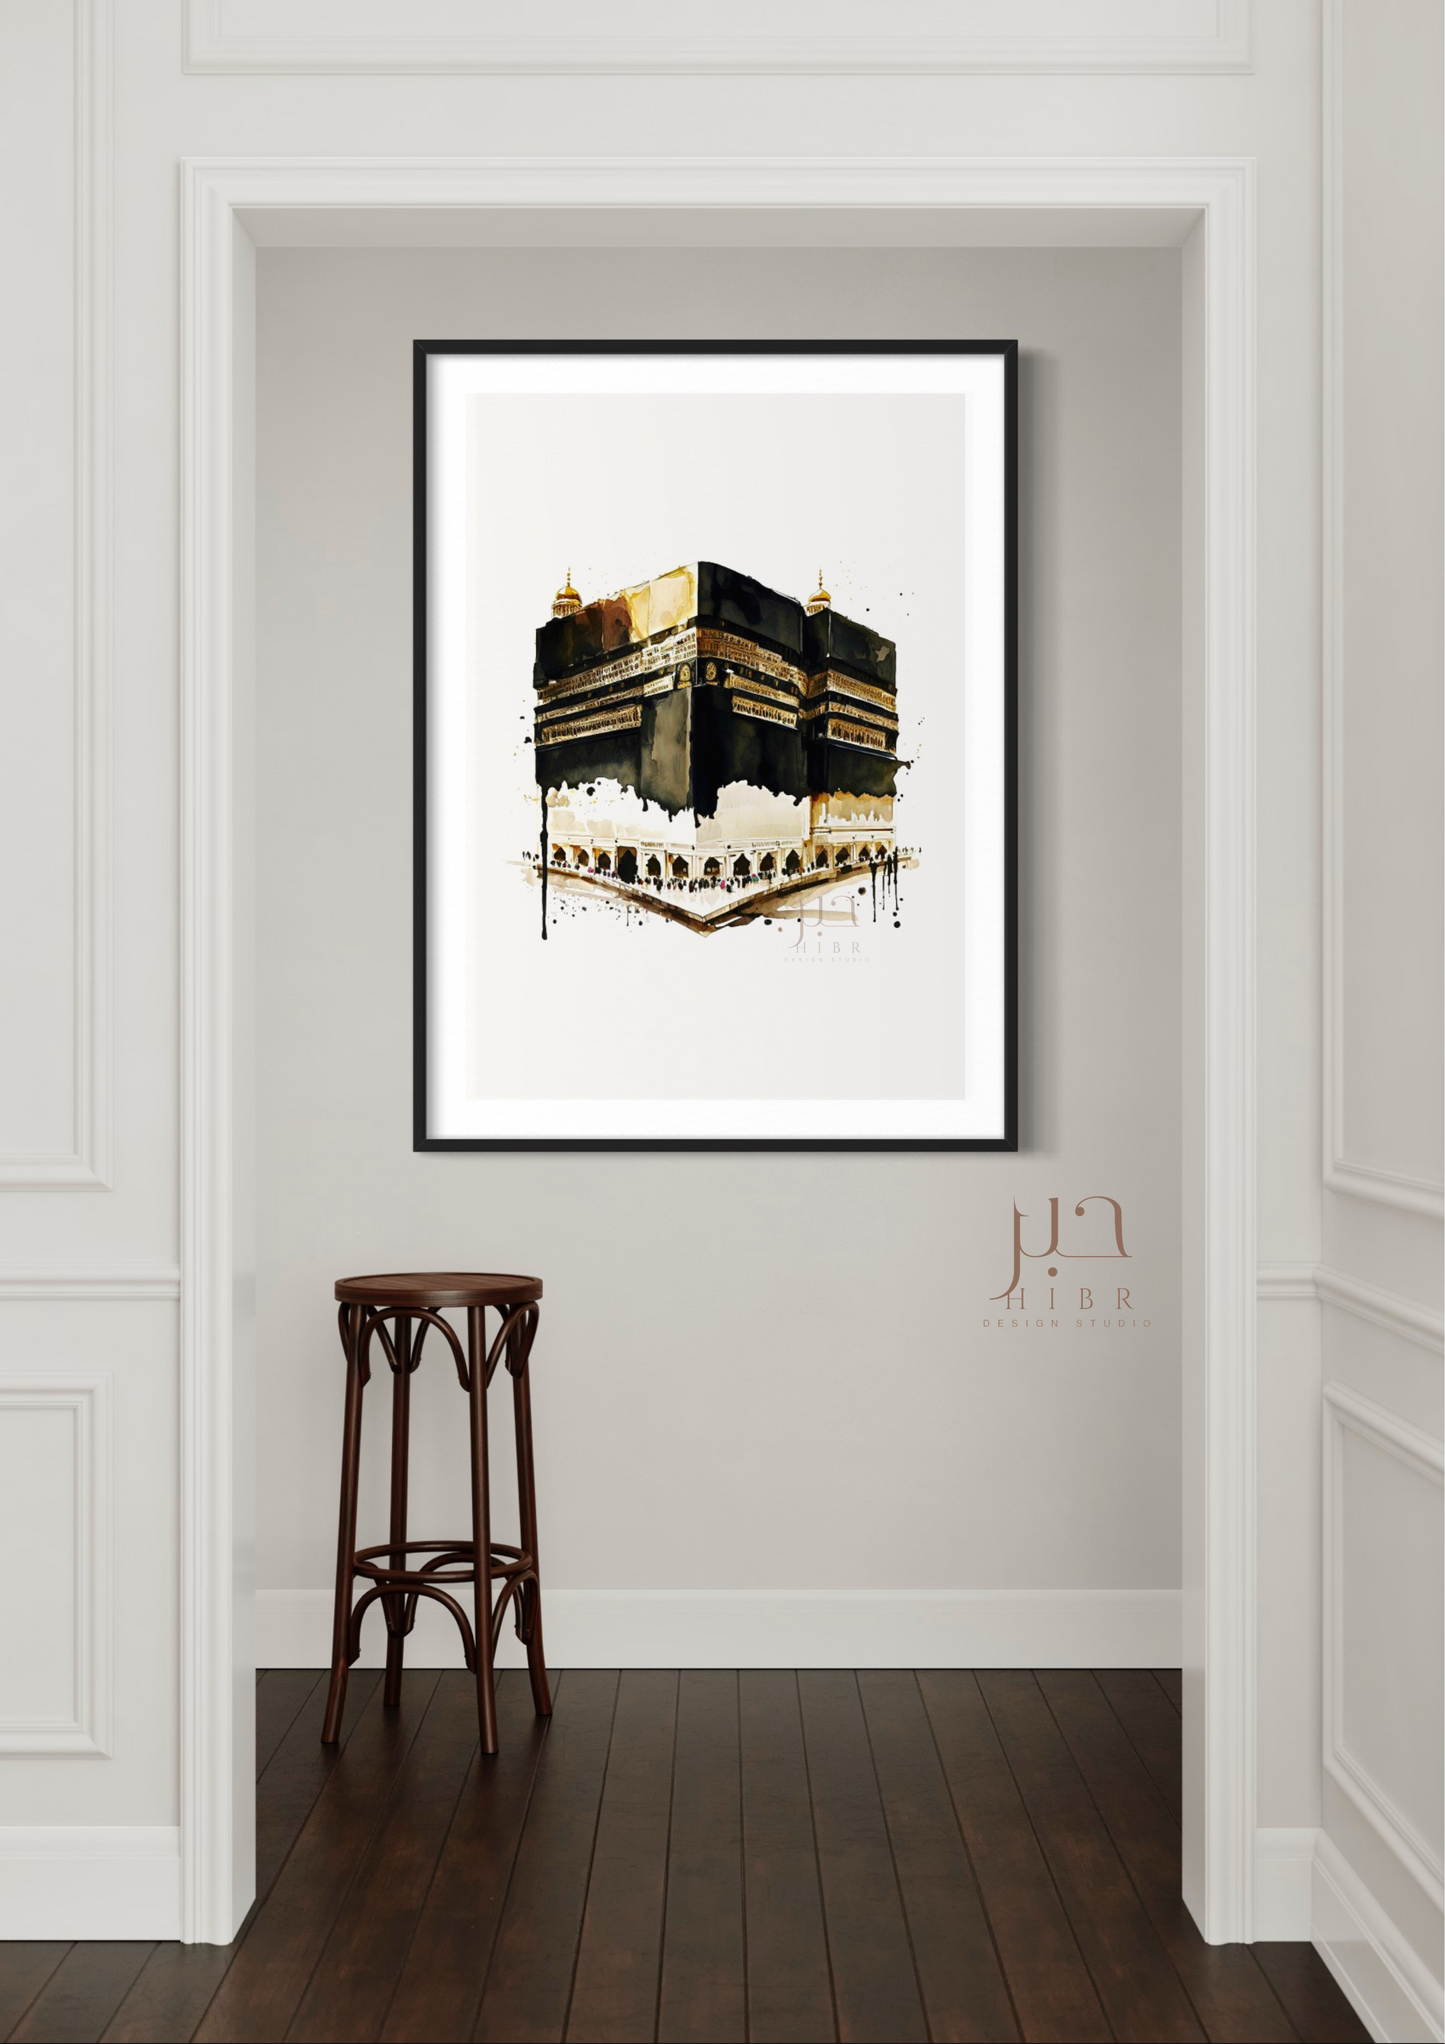 Kabah Majesty: A Watercolour Print of the Holiest Site"